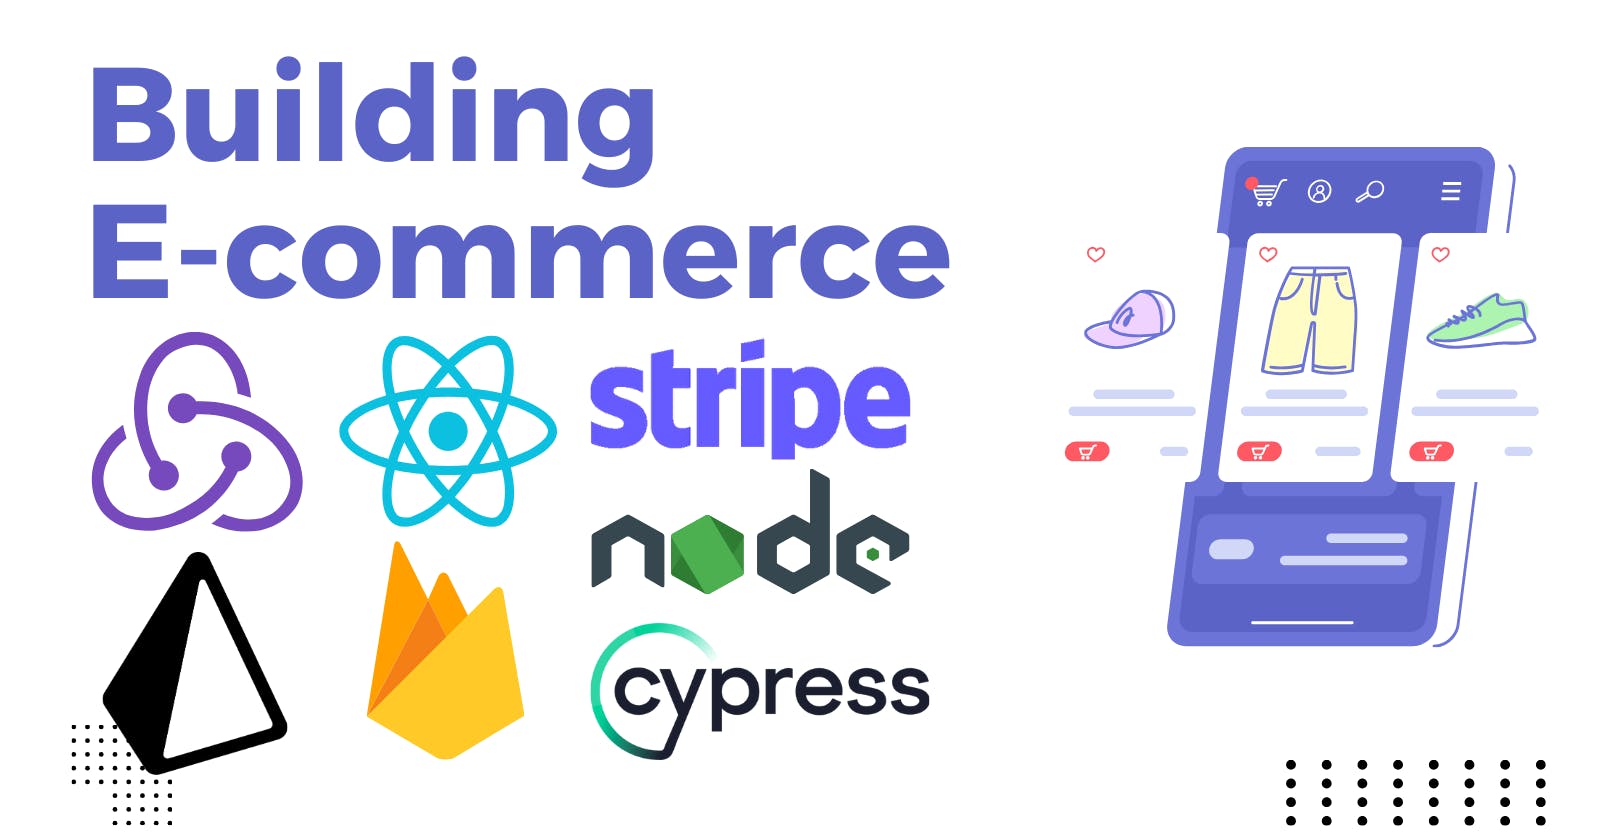 Creating a Full Stack Ecommerce Application from the Ground Up: My Experience